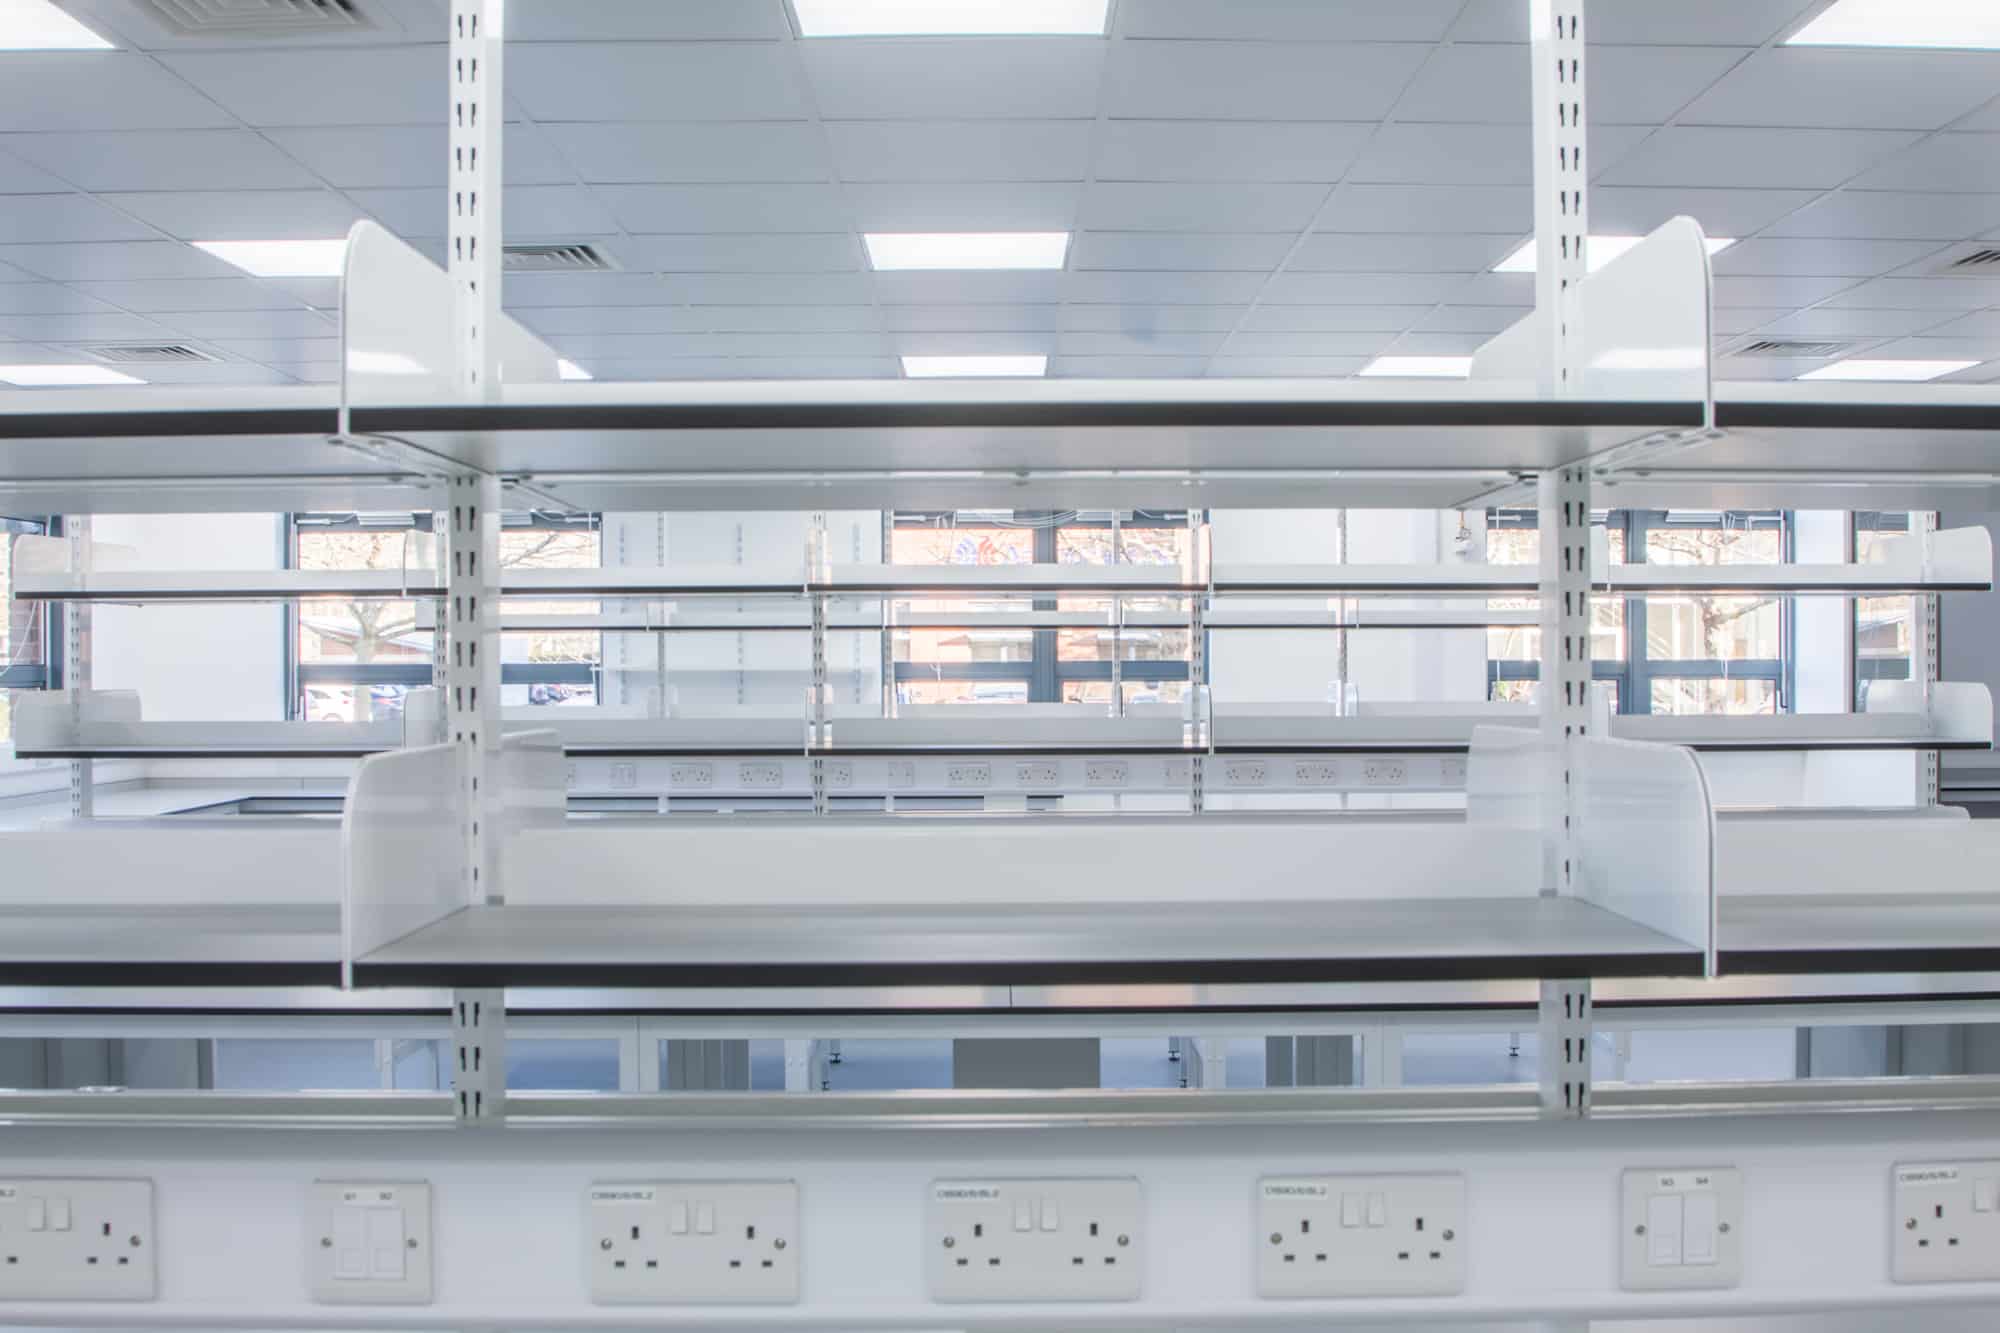 Example of a laboratory fit out